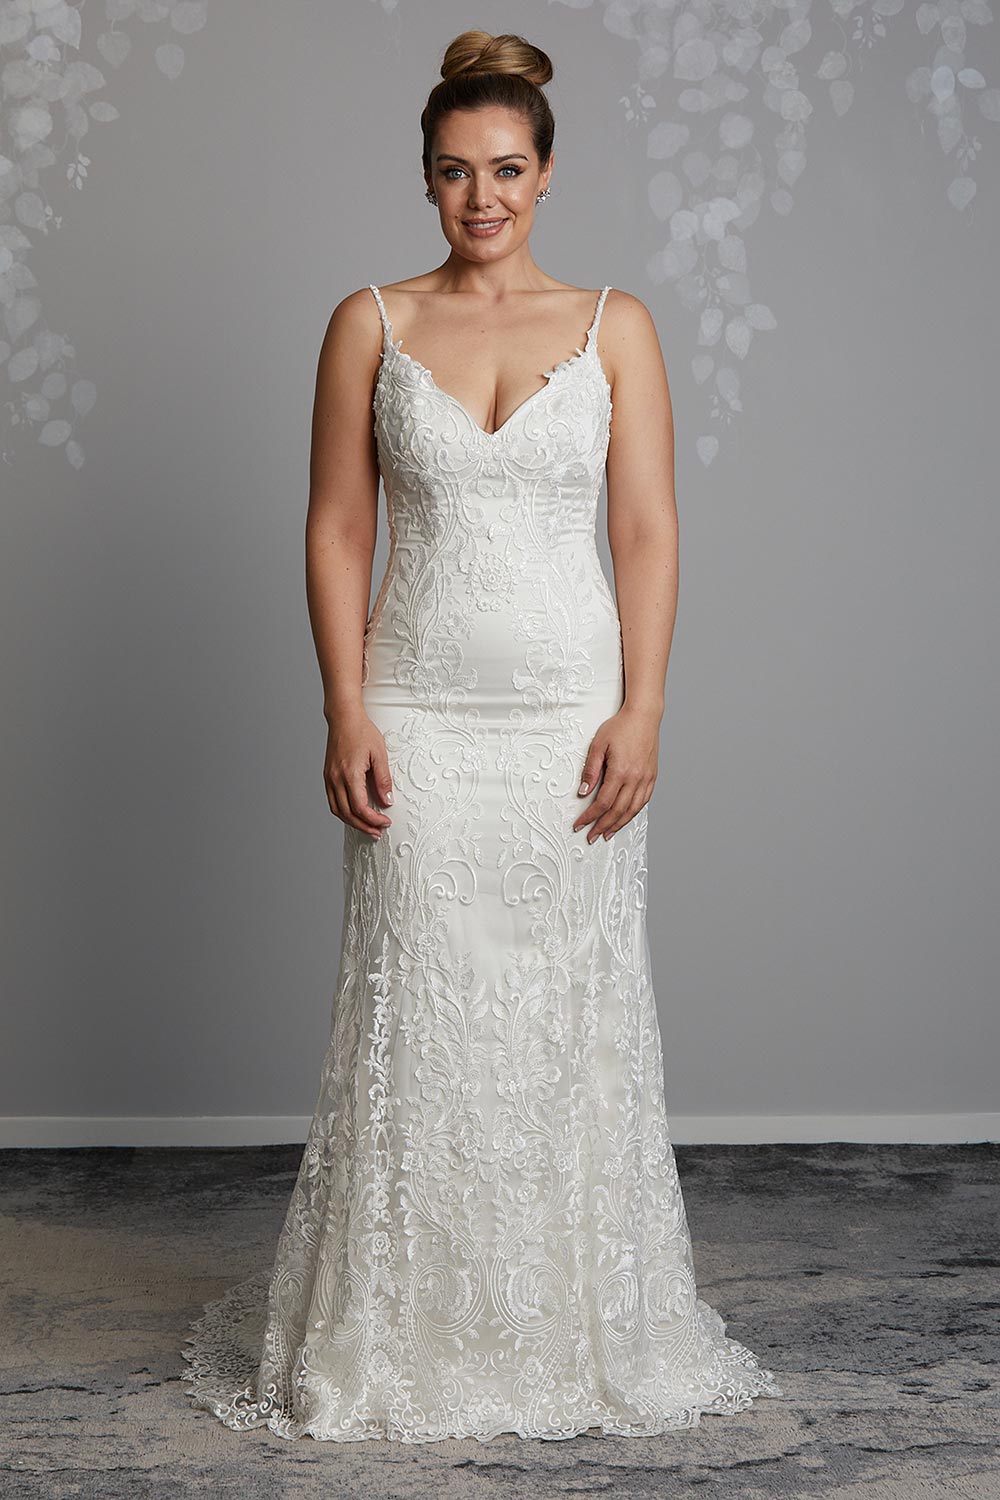 Sahara Wedding Dress from Vinka Design. Stunning fitted lace wedding gown. Lightly-beaded floral lace highlights the ivory stretch satin base. Sweetheart neckline & low back with beautiful lace detail. Full length view of the front of the dress as model smiles.